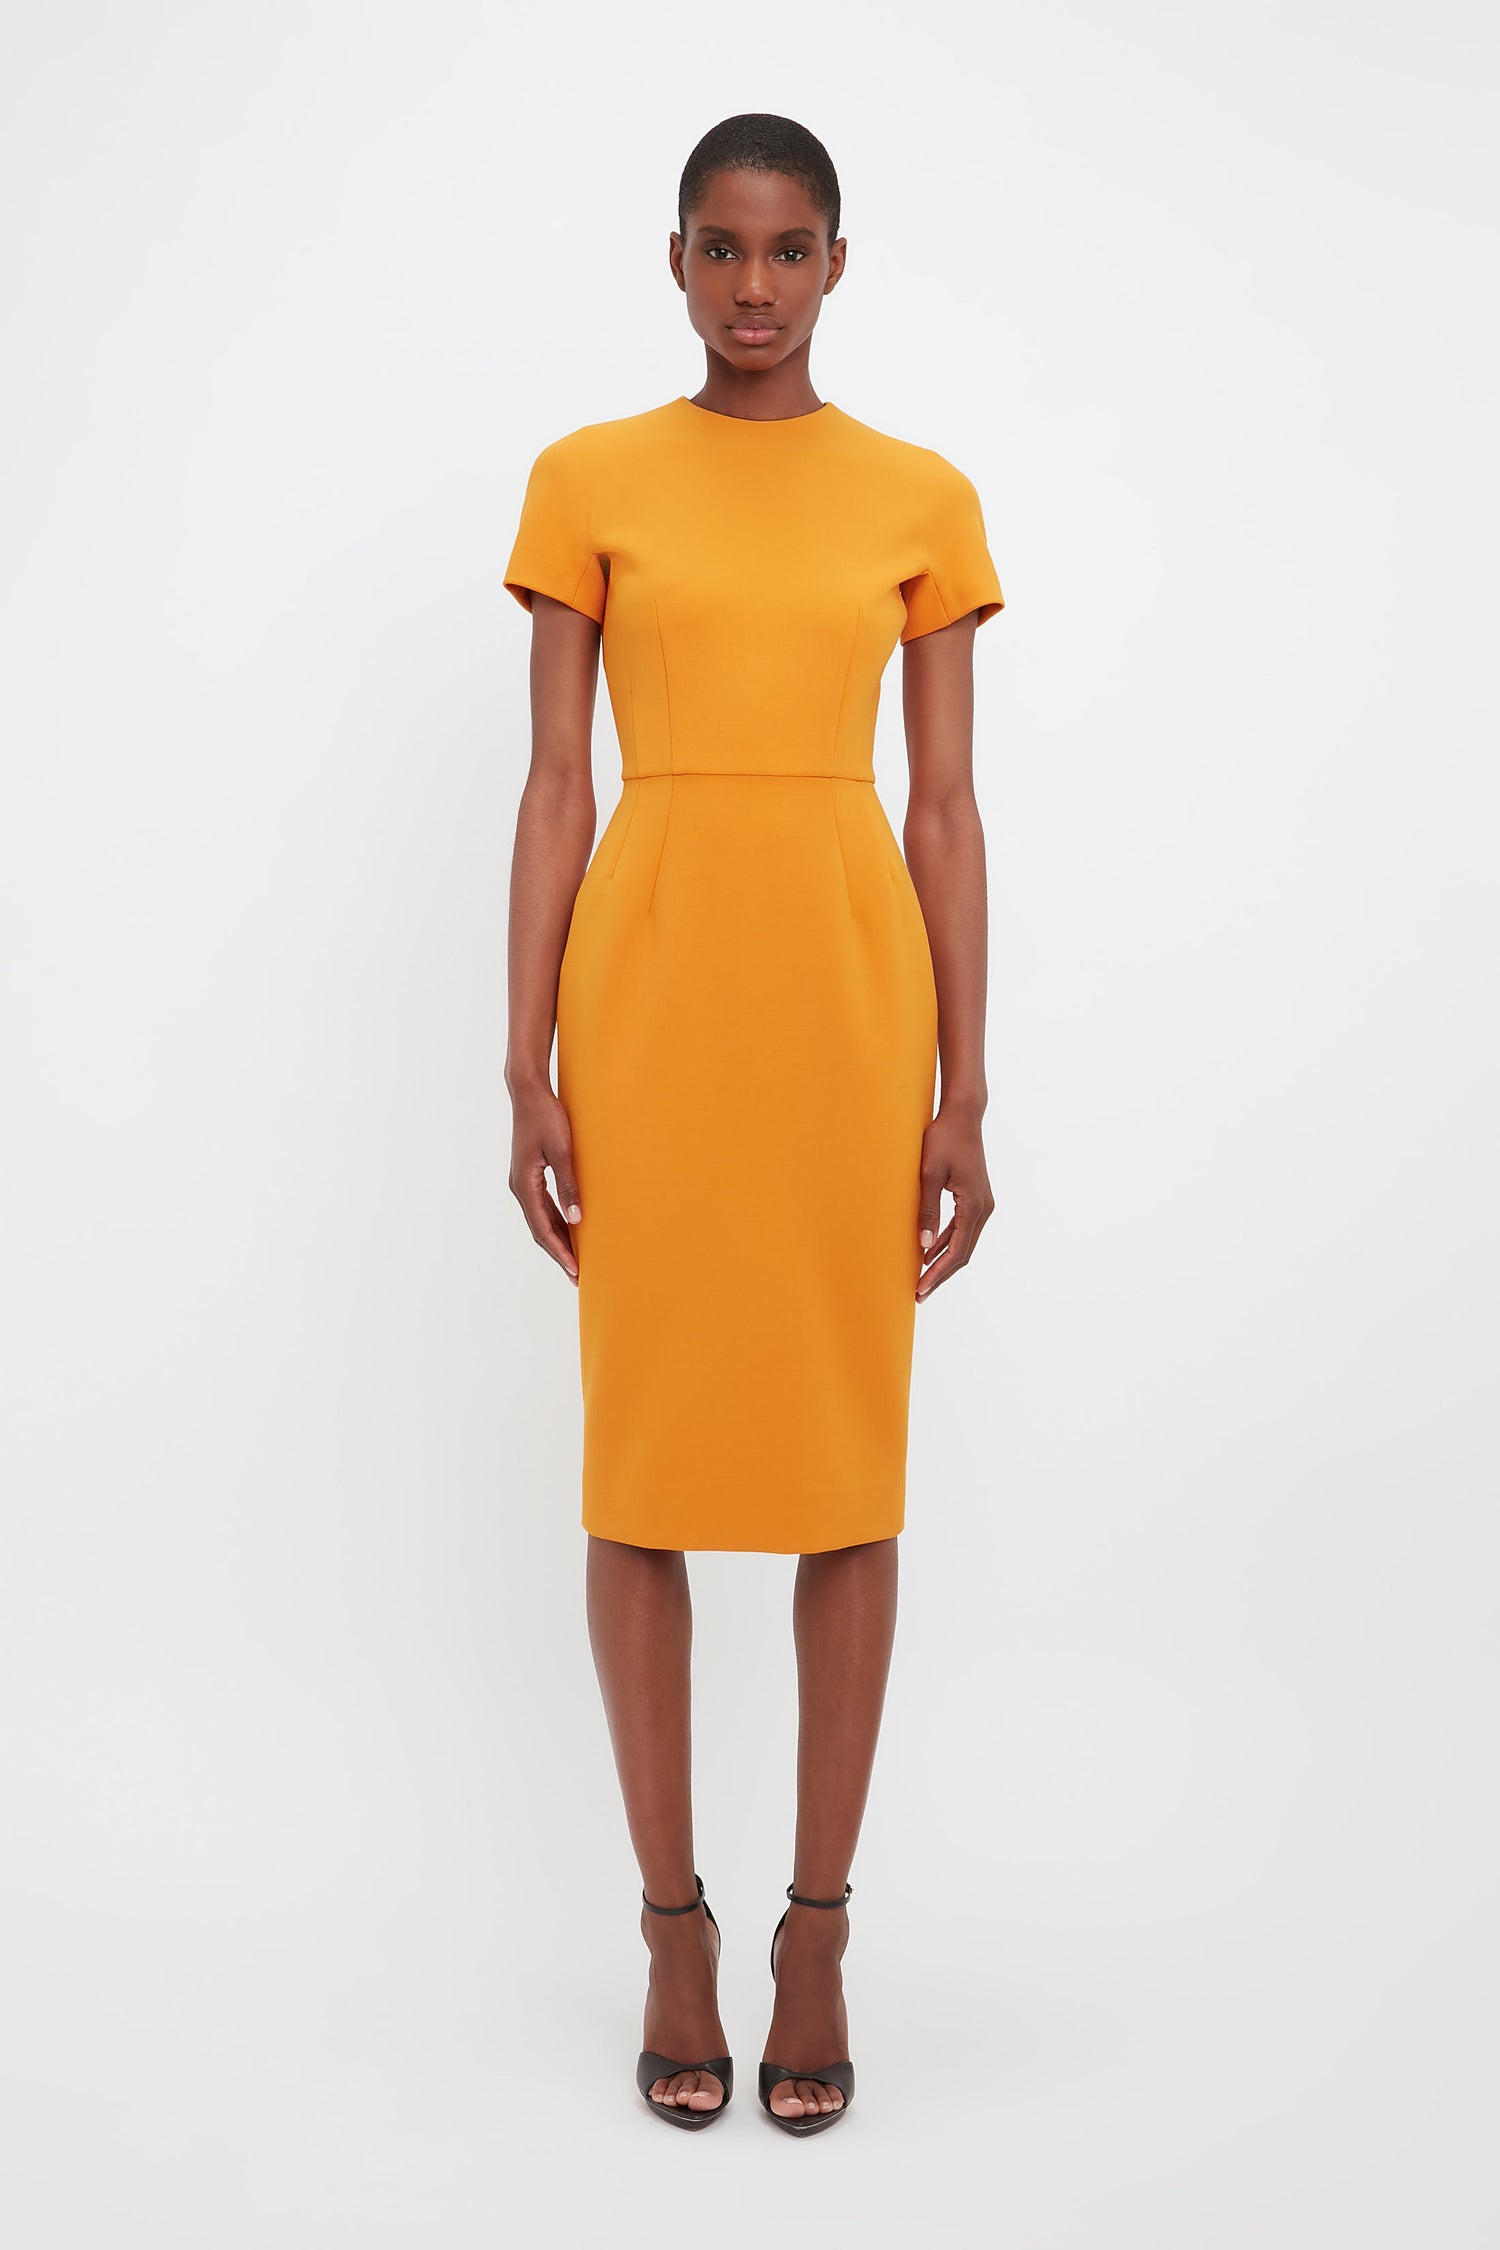 Model wearing the Dart Detailed Fitted T-shirt Dress in Mandarin for designer Victoria Beckham. This orange fitted pencil dress is perfect for workwear or wedding guest dressing. In a fitted style with short sleeves.